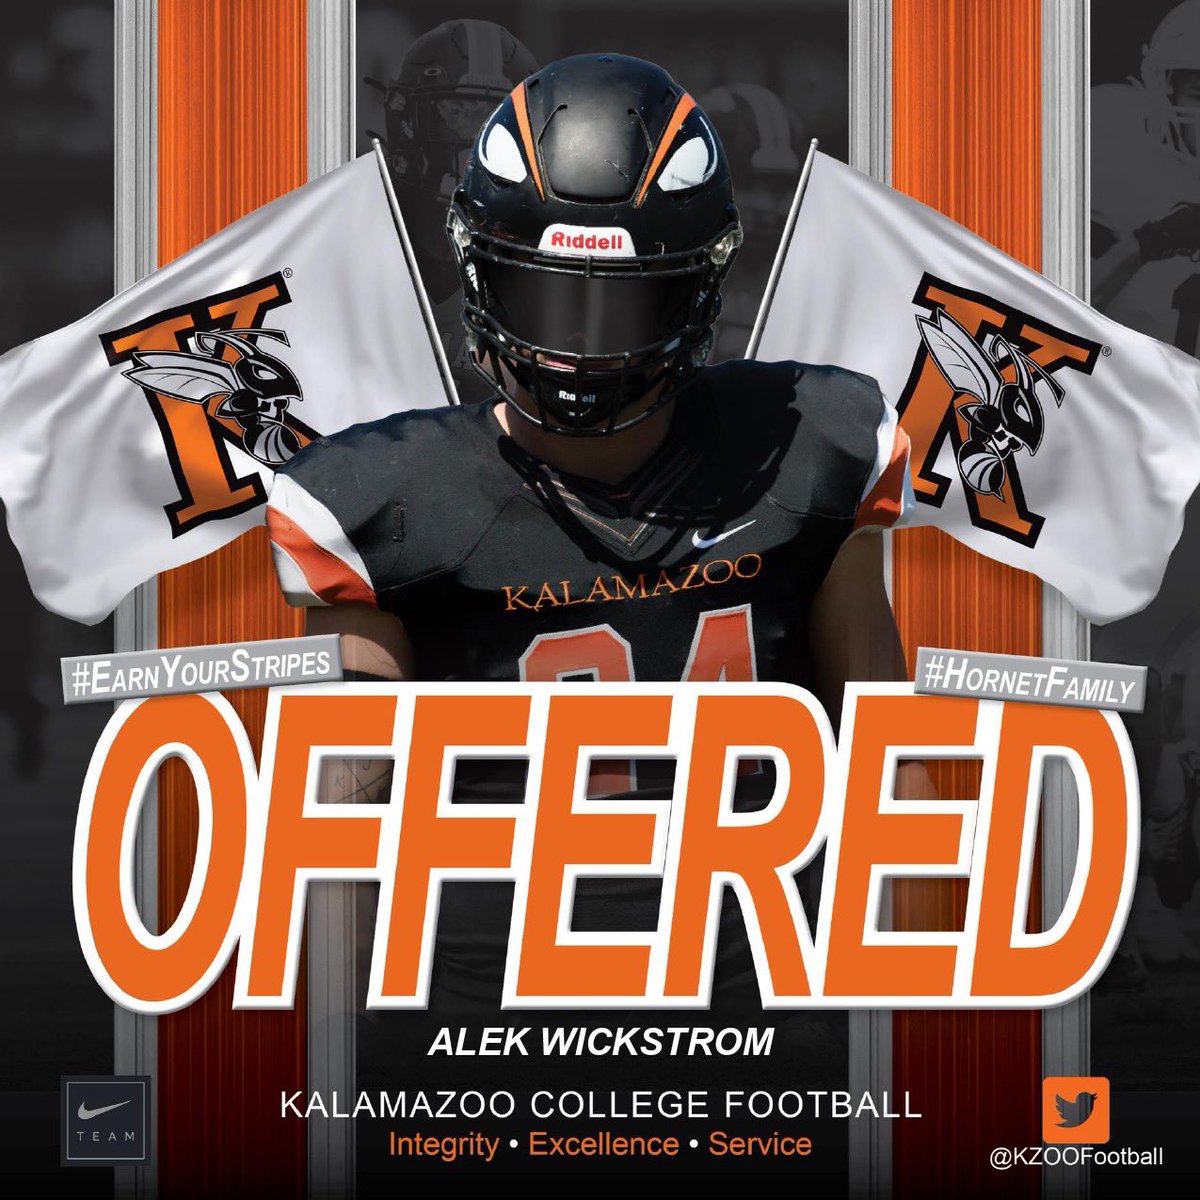 After a great phone call with @CoachRiceKZoo I am excited to receive a roster spot offer from Kalamazoo College! @CoachLGrove @GRWCFootball